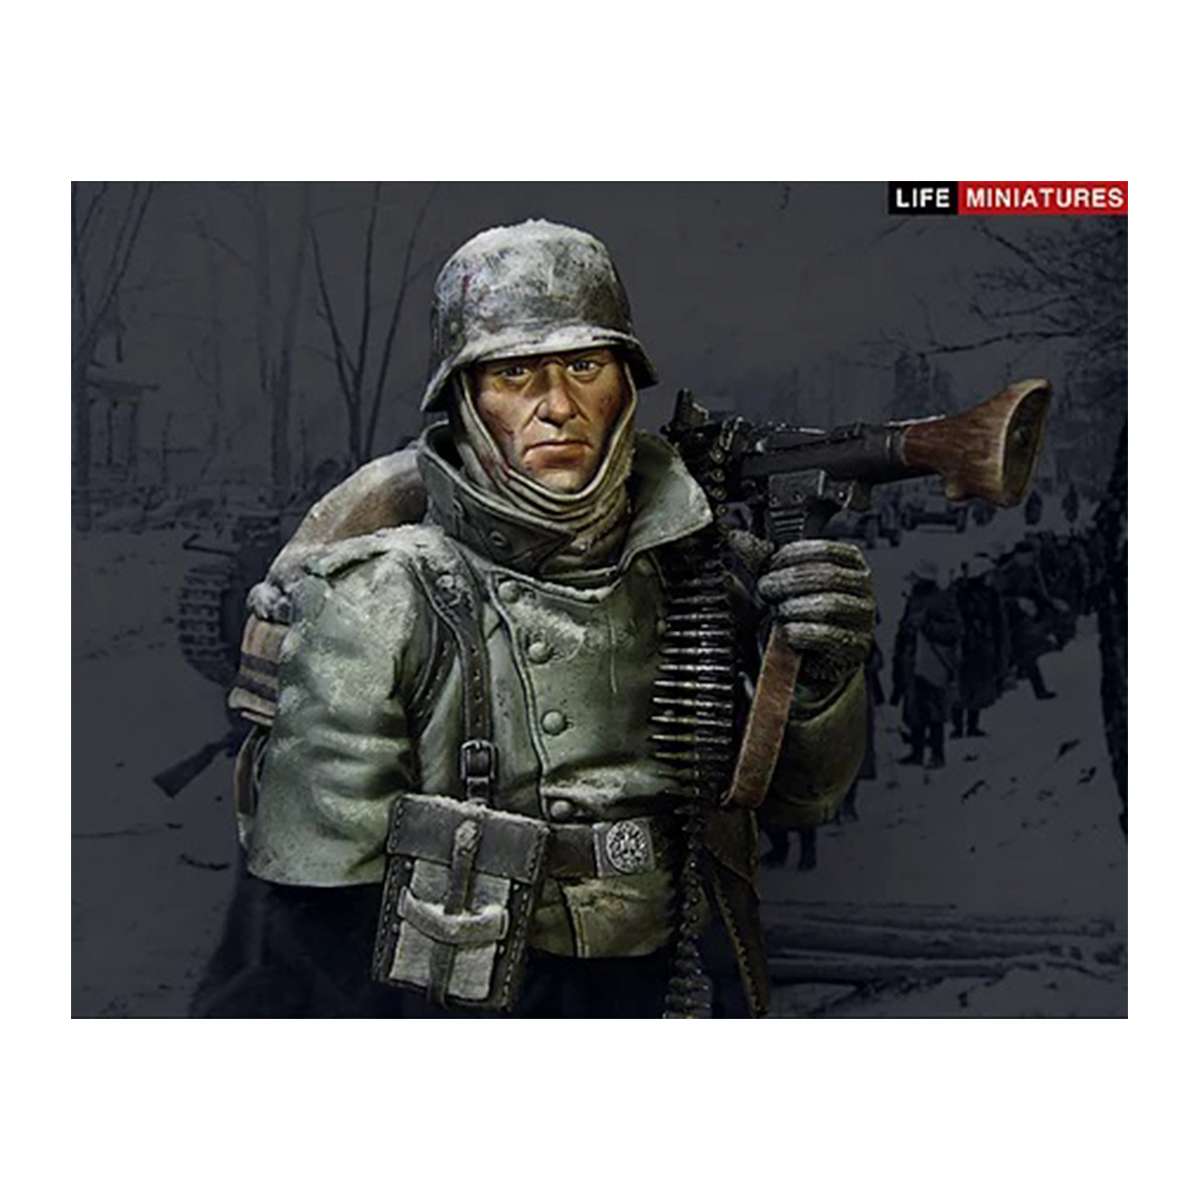 Life Miniatures – Confronted with «General Winter» WW2 German MG34 Gunner, Outskirts of Moscow – 1/10 bust